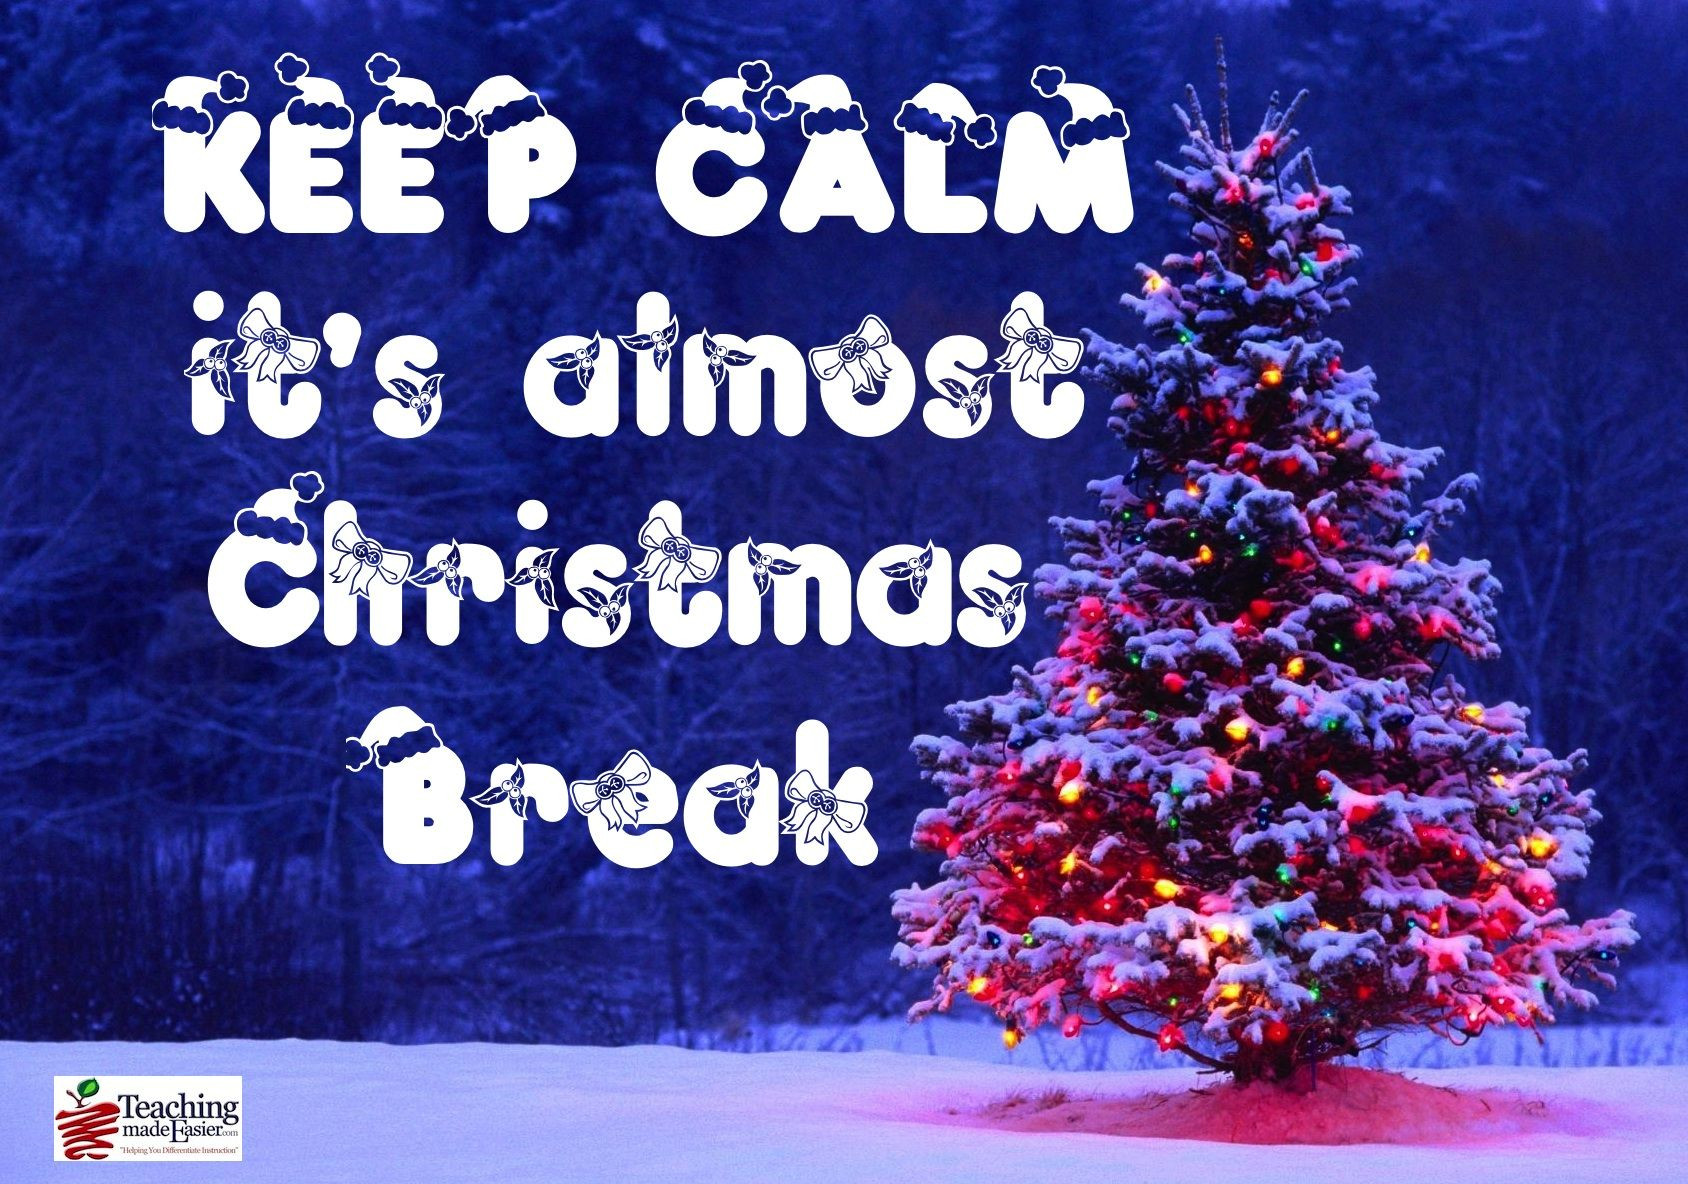 Almost Christmas Movie Quotes
 Keep calm s almost Christmas Break